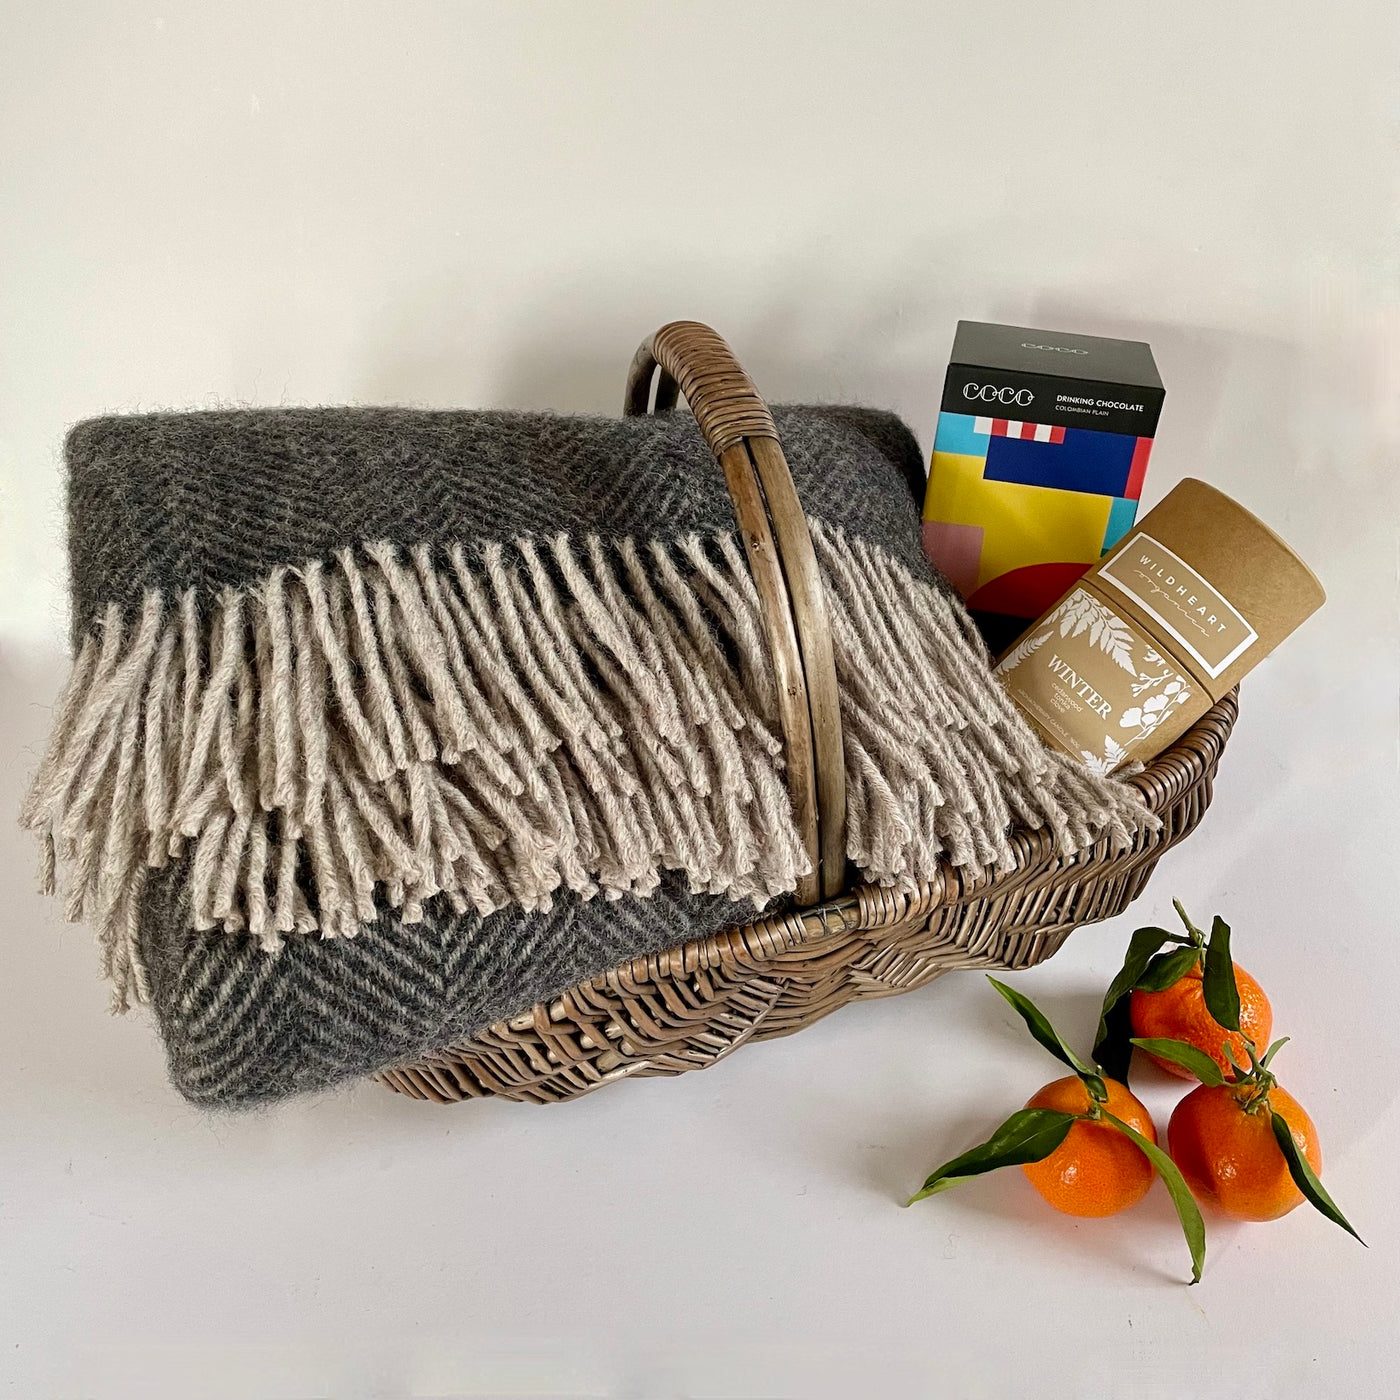 The St Andrews Hamper Company hygge pamper hamper with a selection of organic and eco-friendly gifts including a charcoal and silver herringbone weave pure new wool full size throw, Wildheart Organics winter scented natural soy candle, Coco Chocolatier Columbian drinking chocolate inside a hessian lined handwoven country style basket.